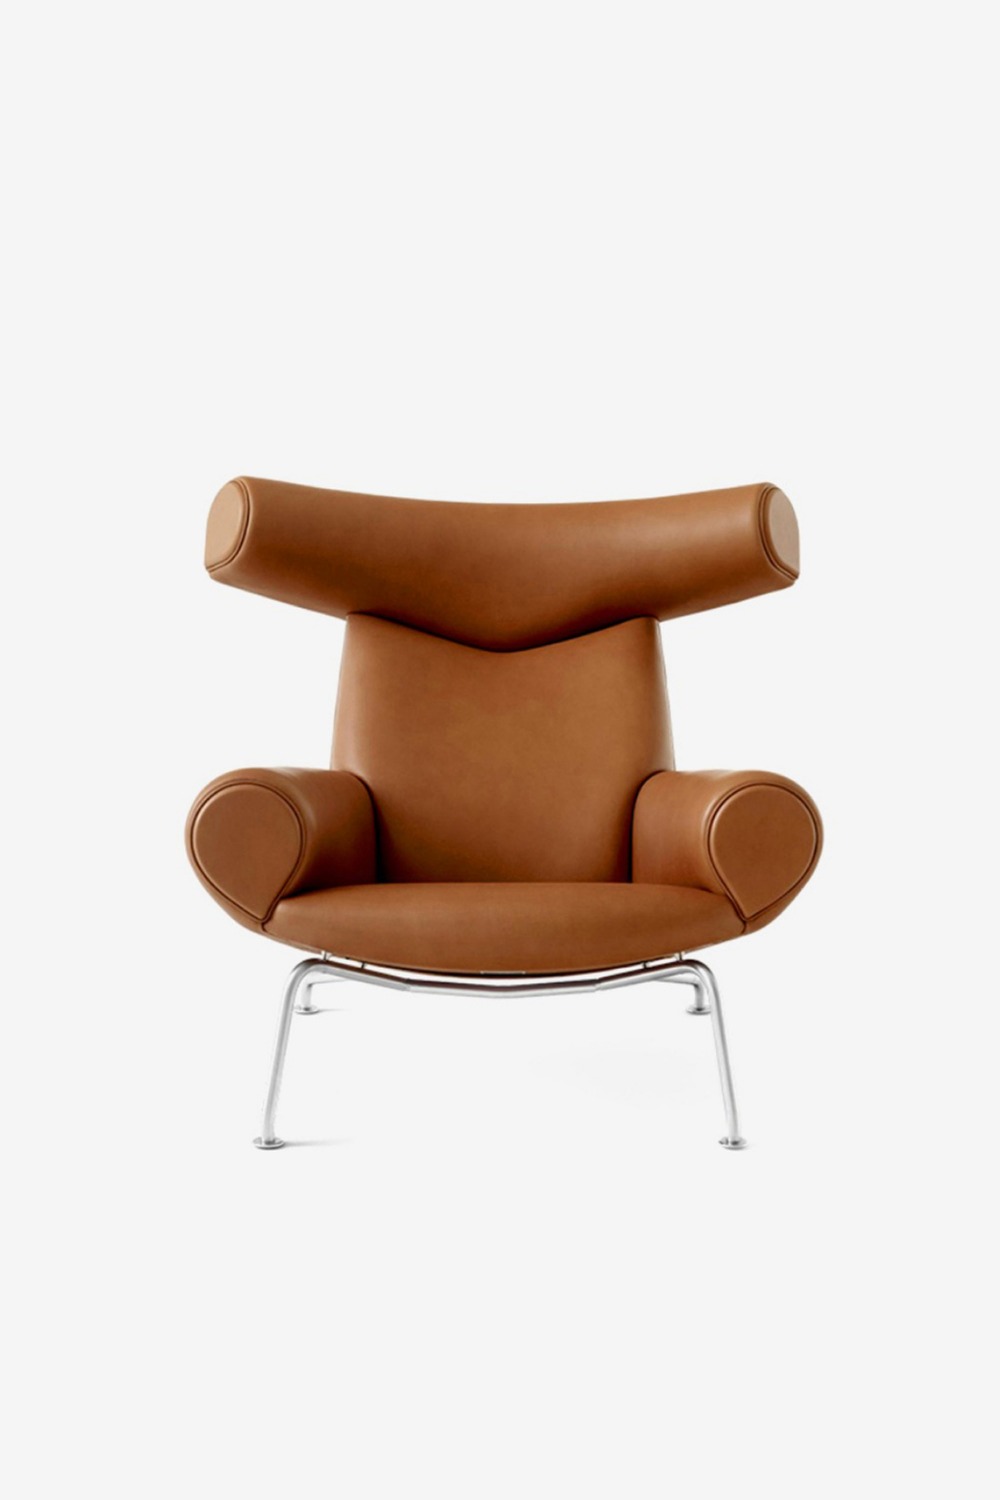 [Fredericia] Wegner OX chair (Leather)